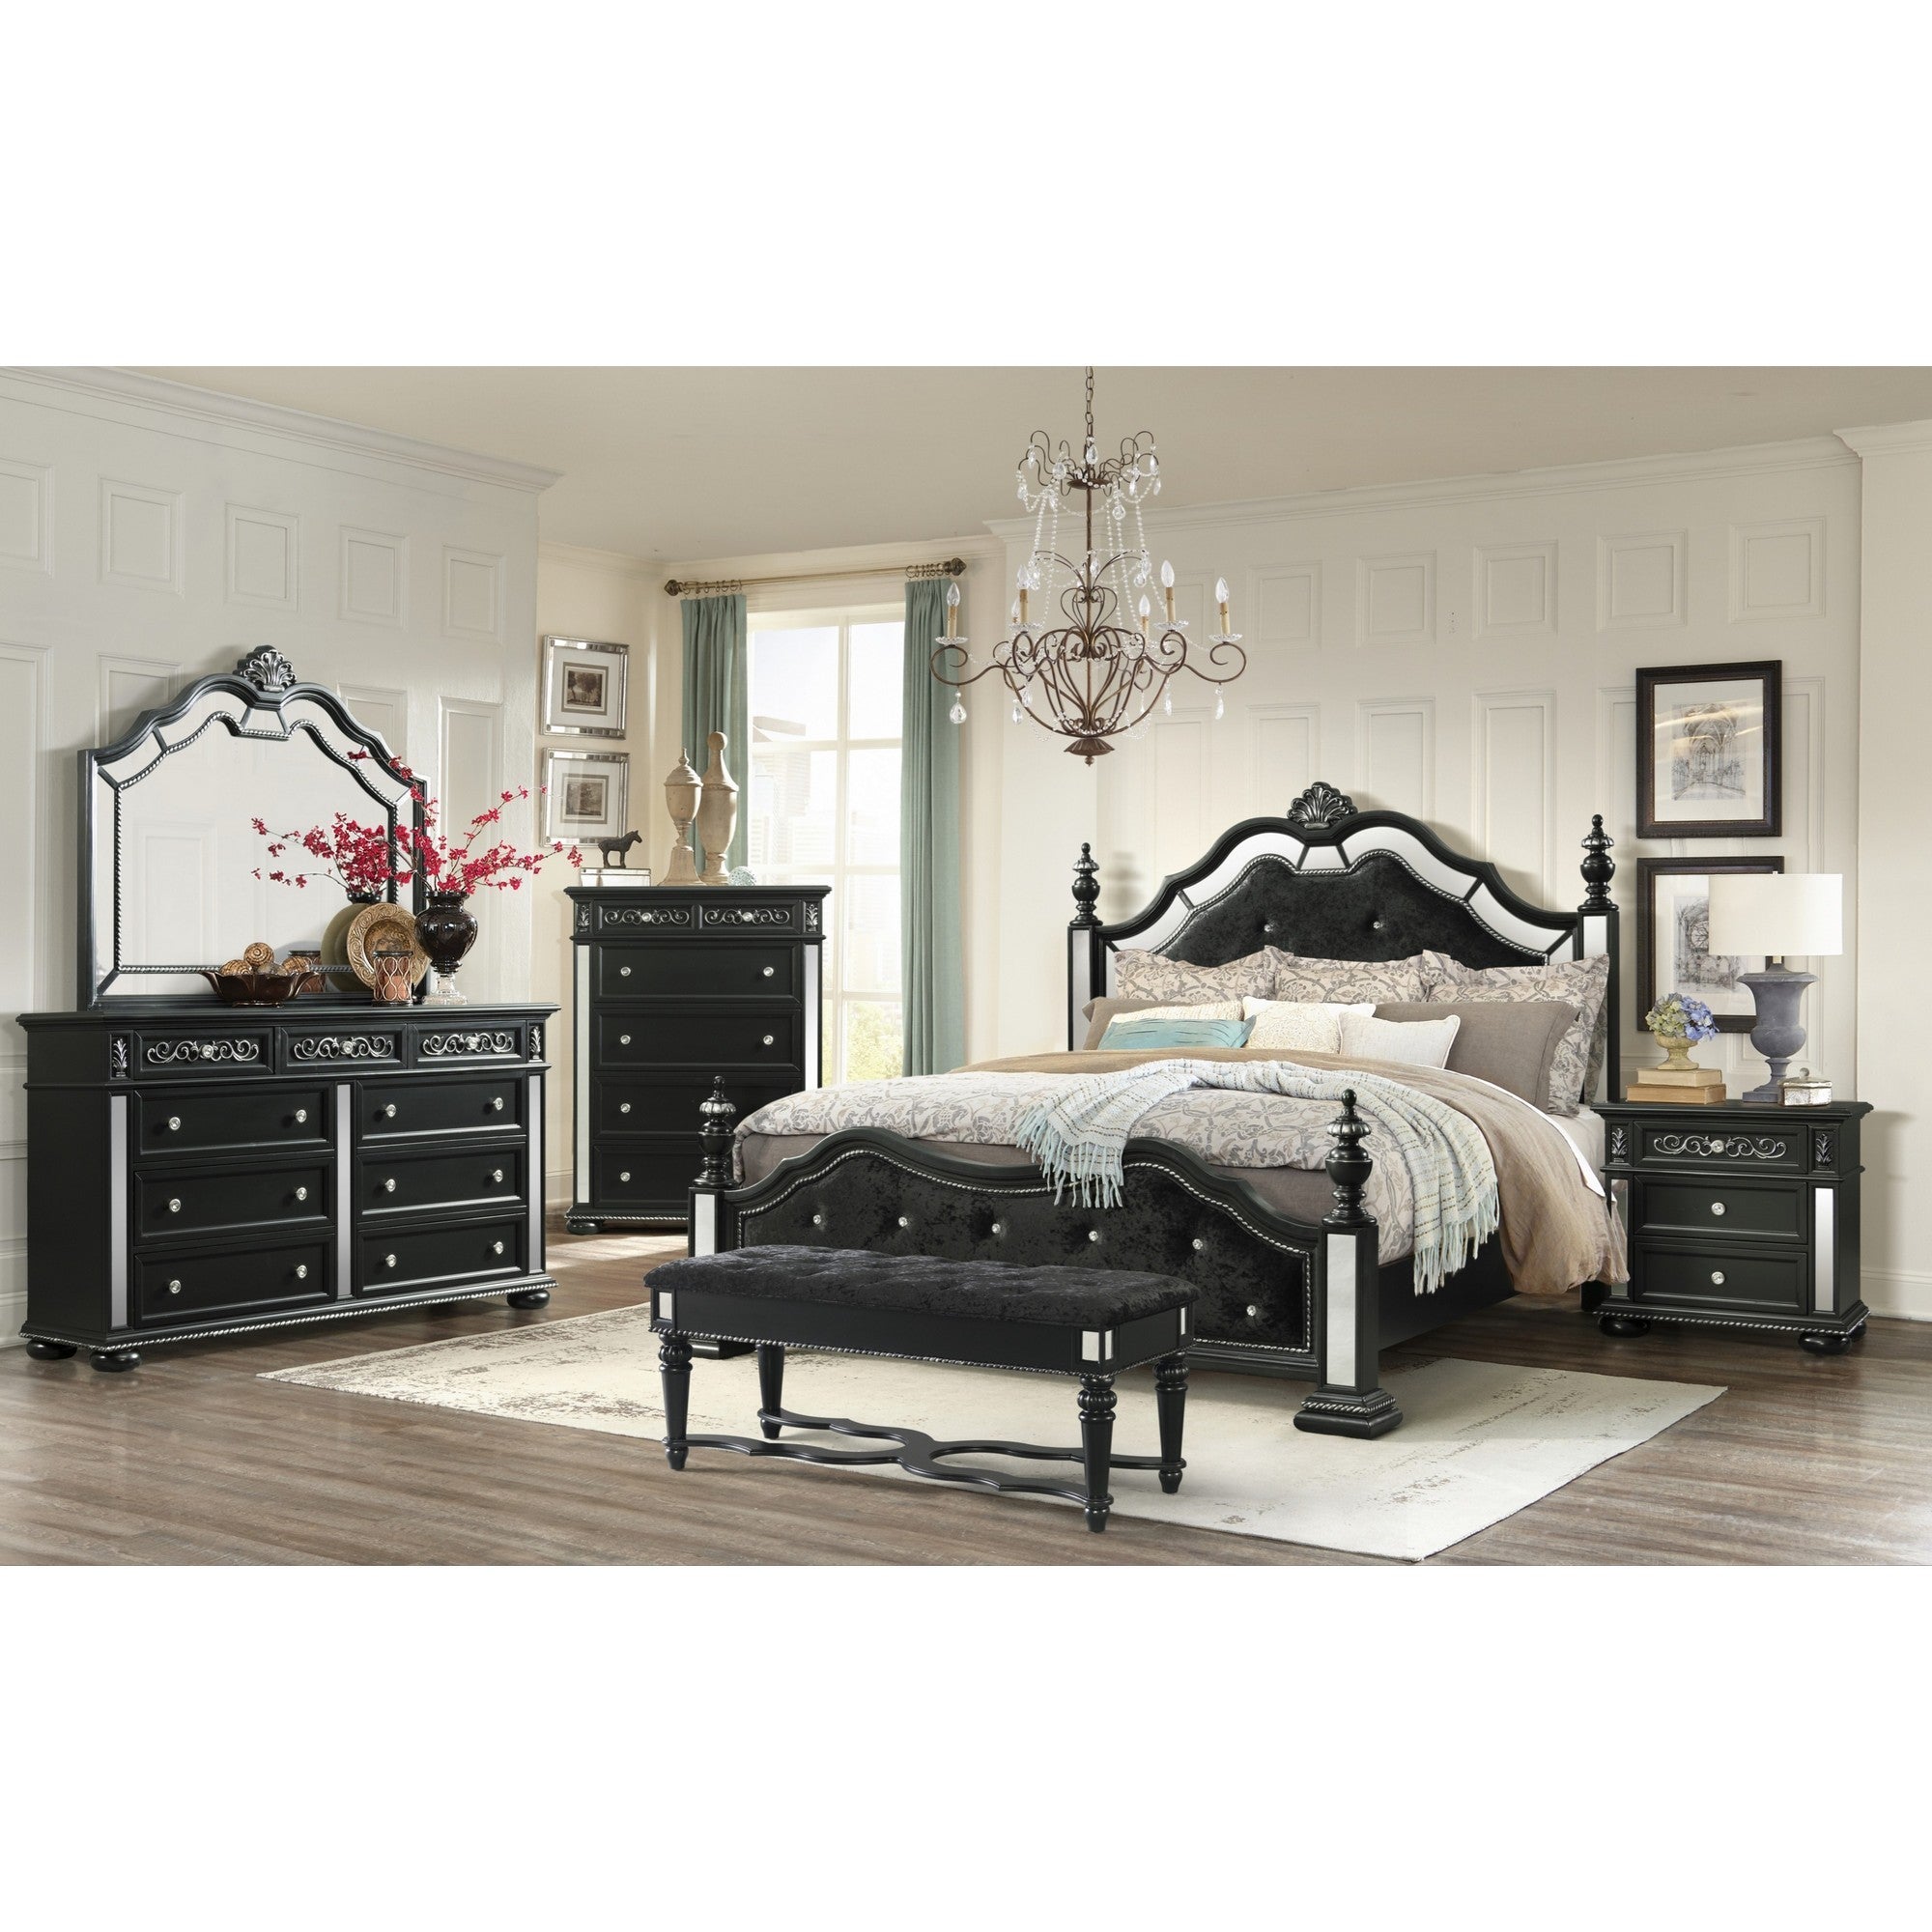 Black Felt finish Queen Bed with crystal mirrored embellished